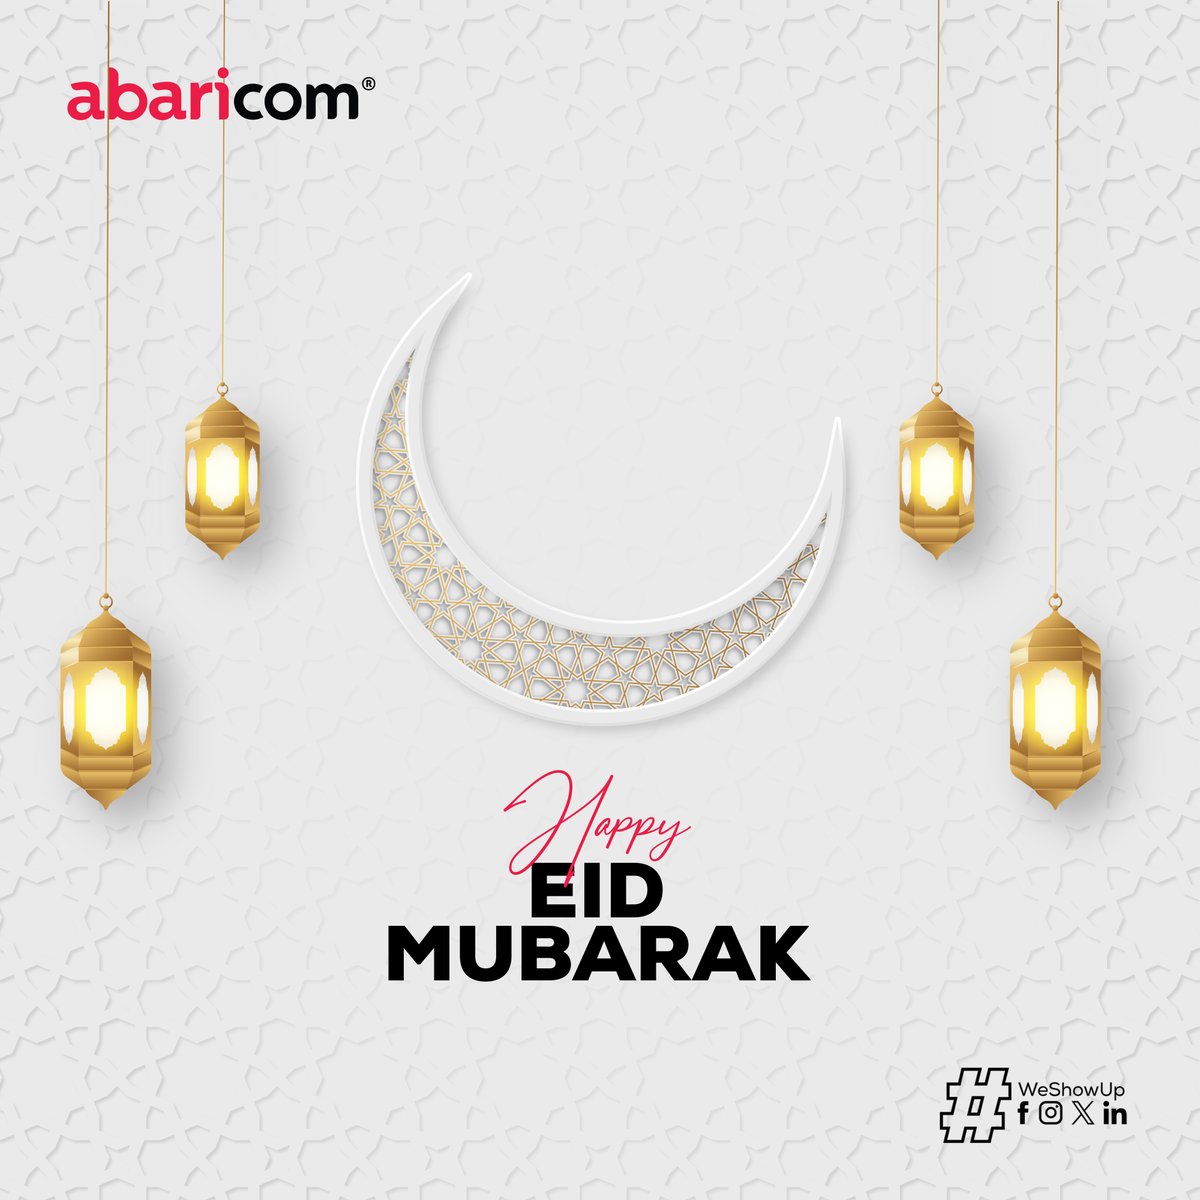 Wishing you a joyous Eid filled with seamless connections and endless blessings!

#WeShowUp